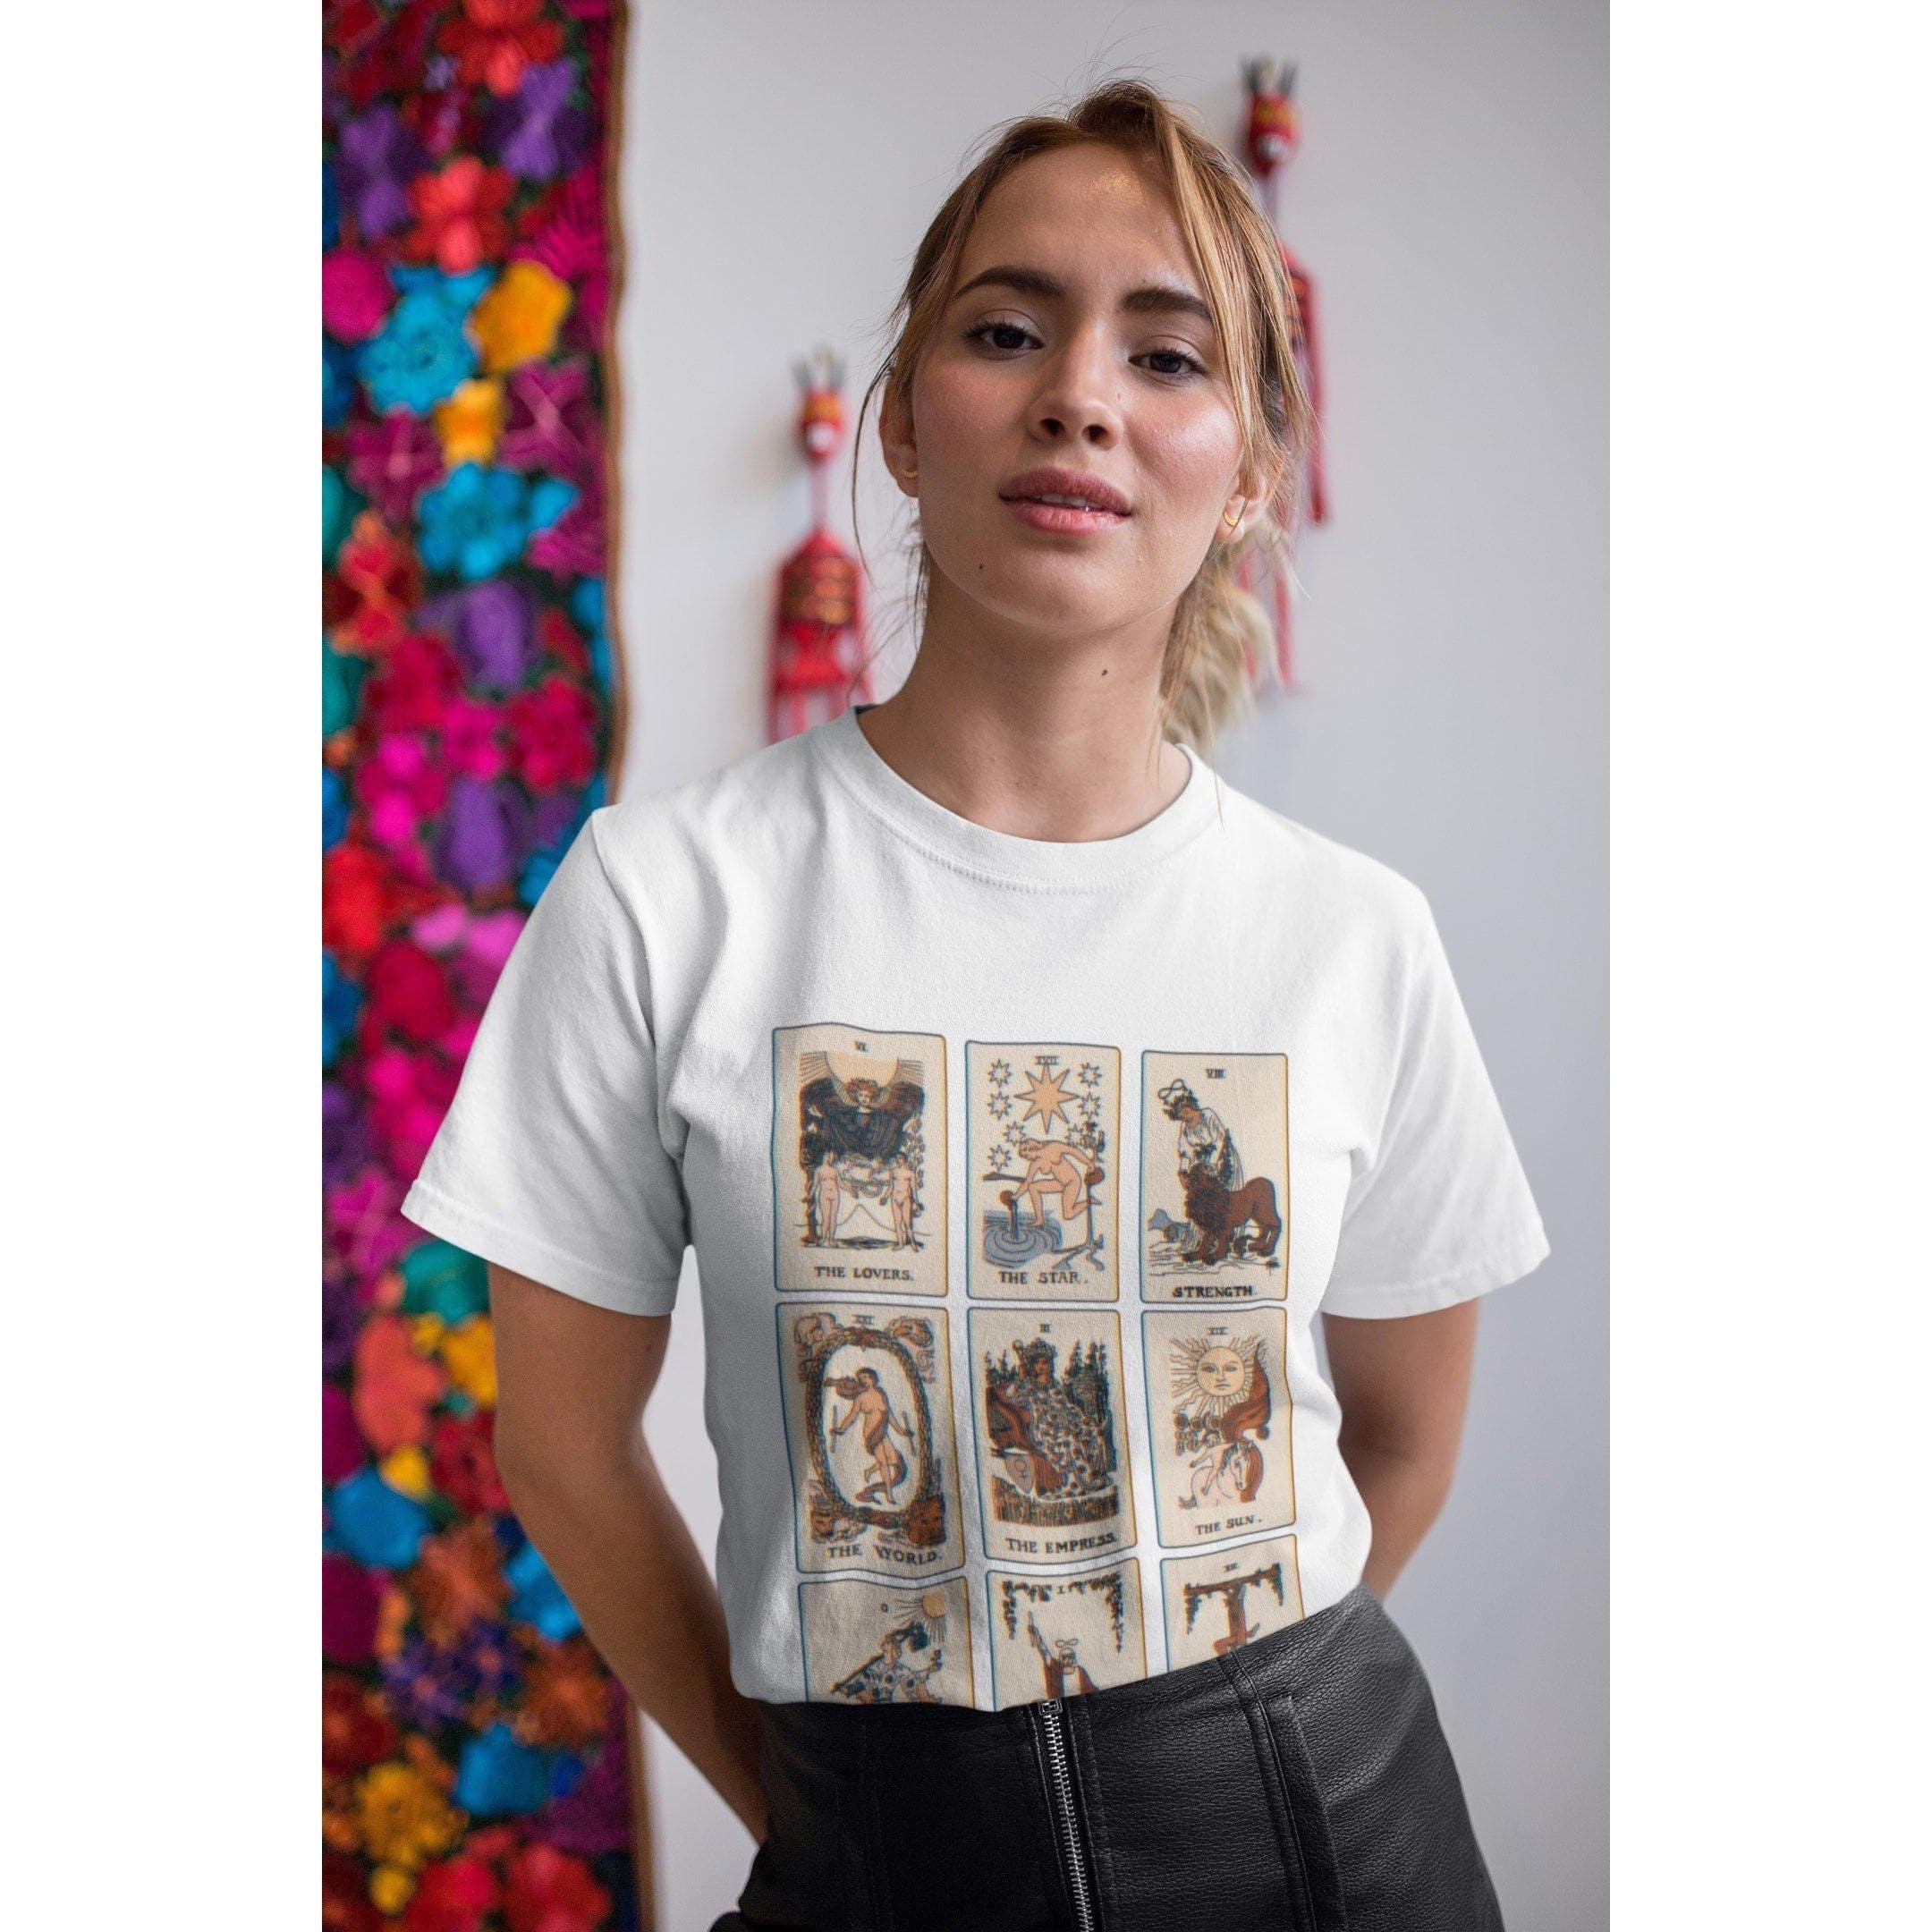 Tarot Card Tee Graphic Tshirt For Women Ladies Tee Shirt Aesthetic Witchy T-Shirt With Tarot Cards